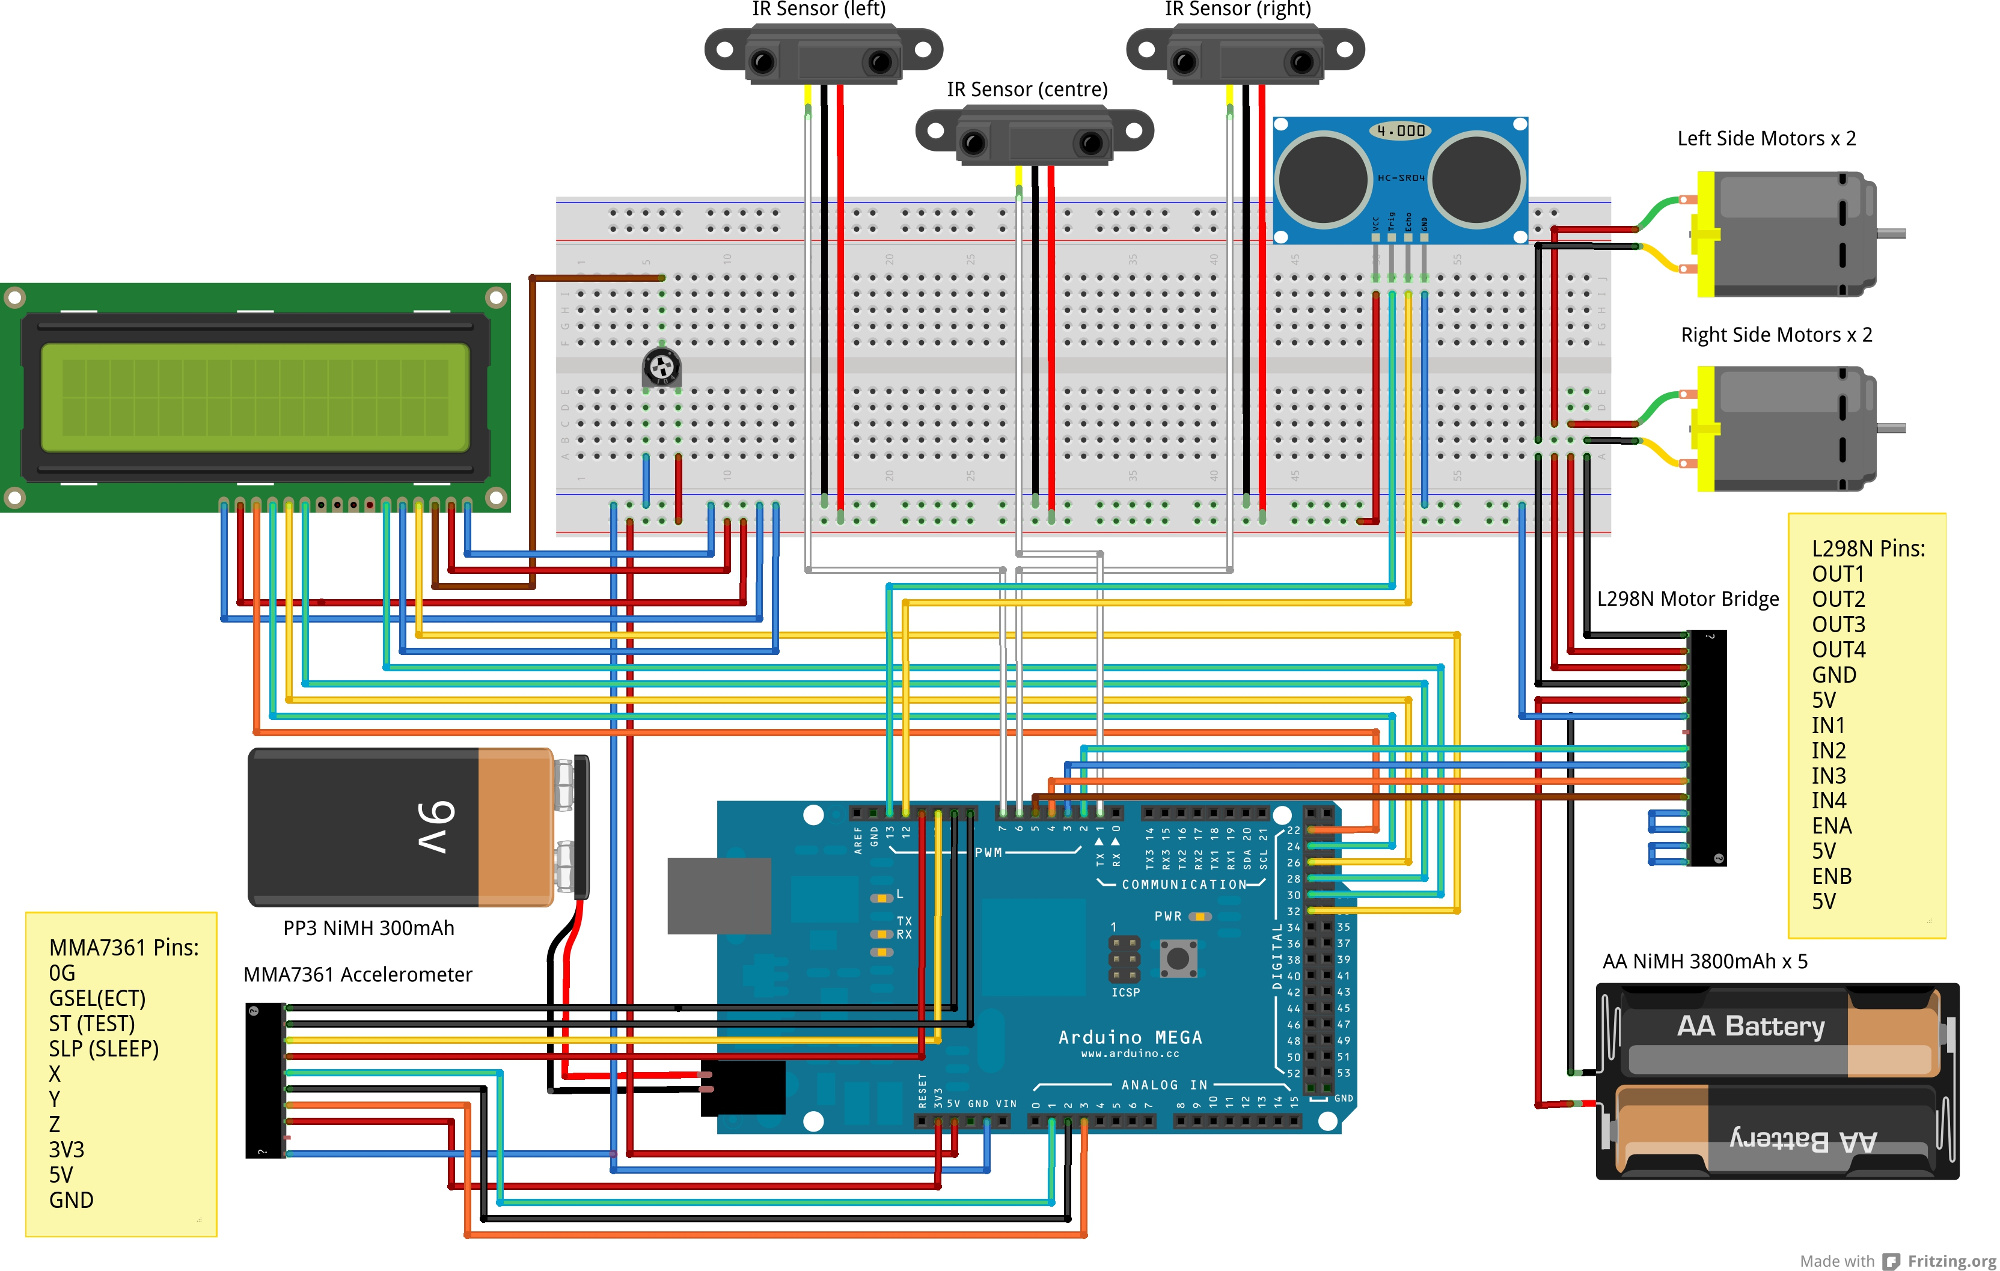 Robo 3D Wiring Diagram from www.kevinpeat.com